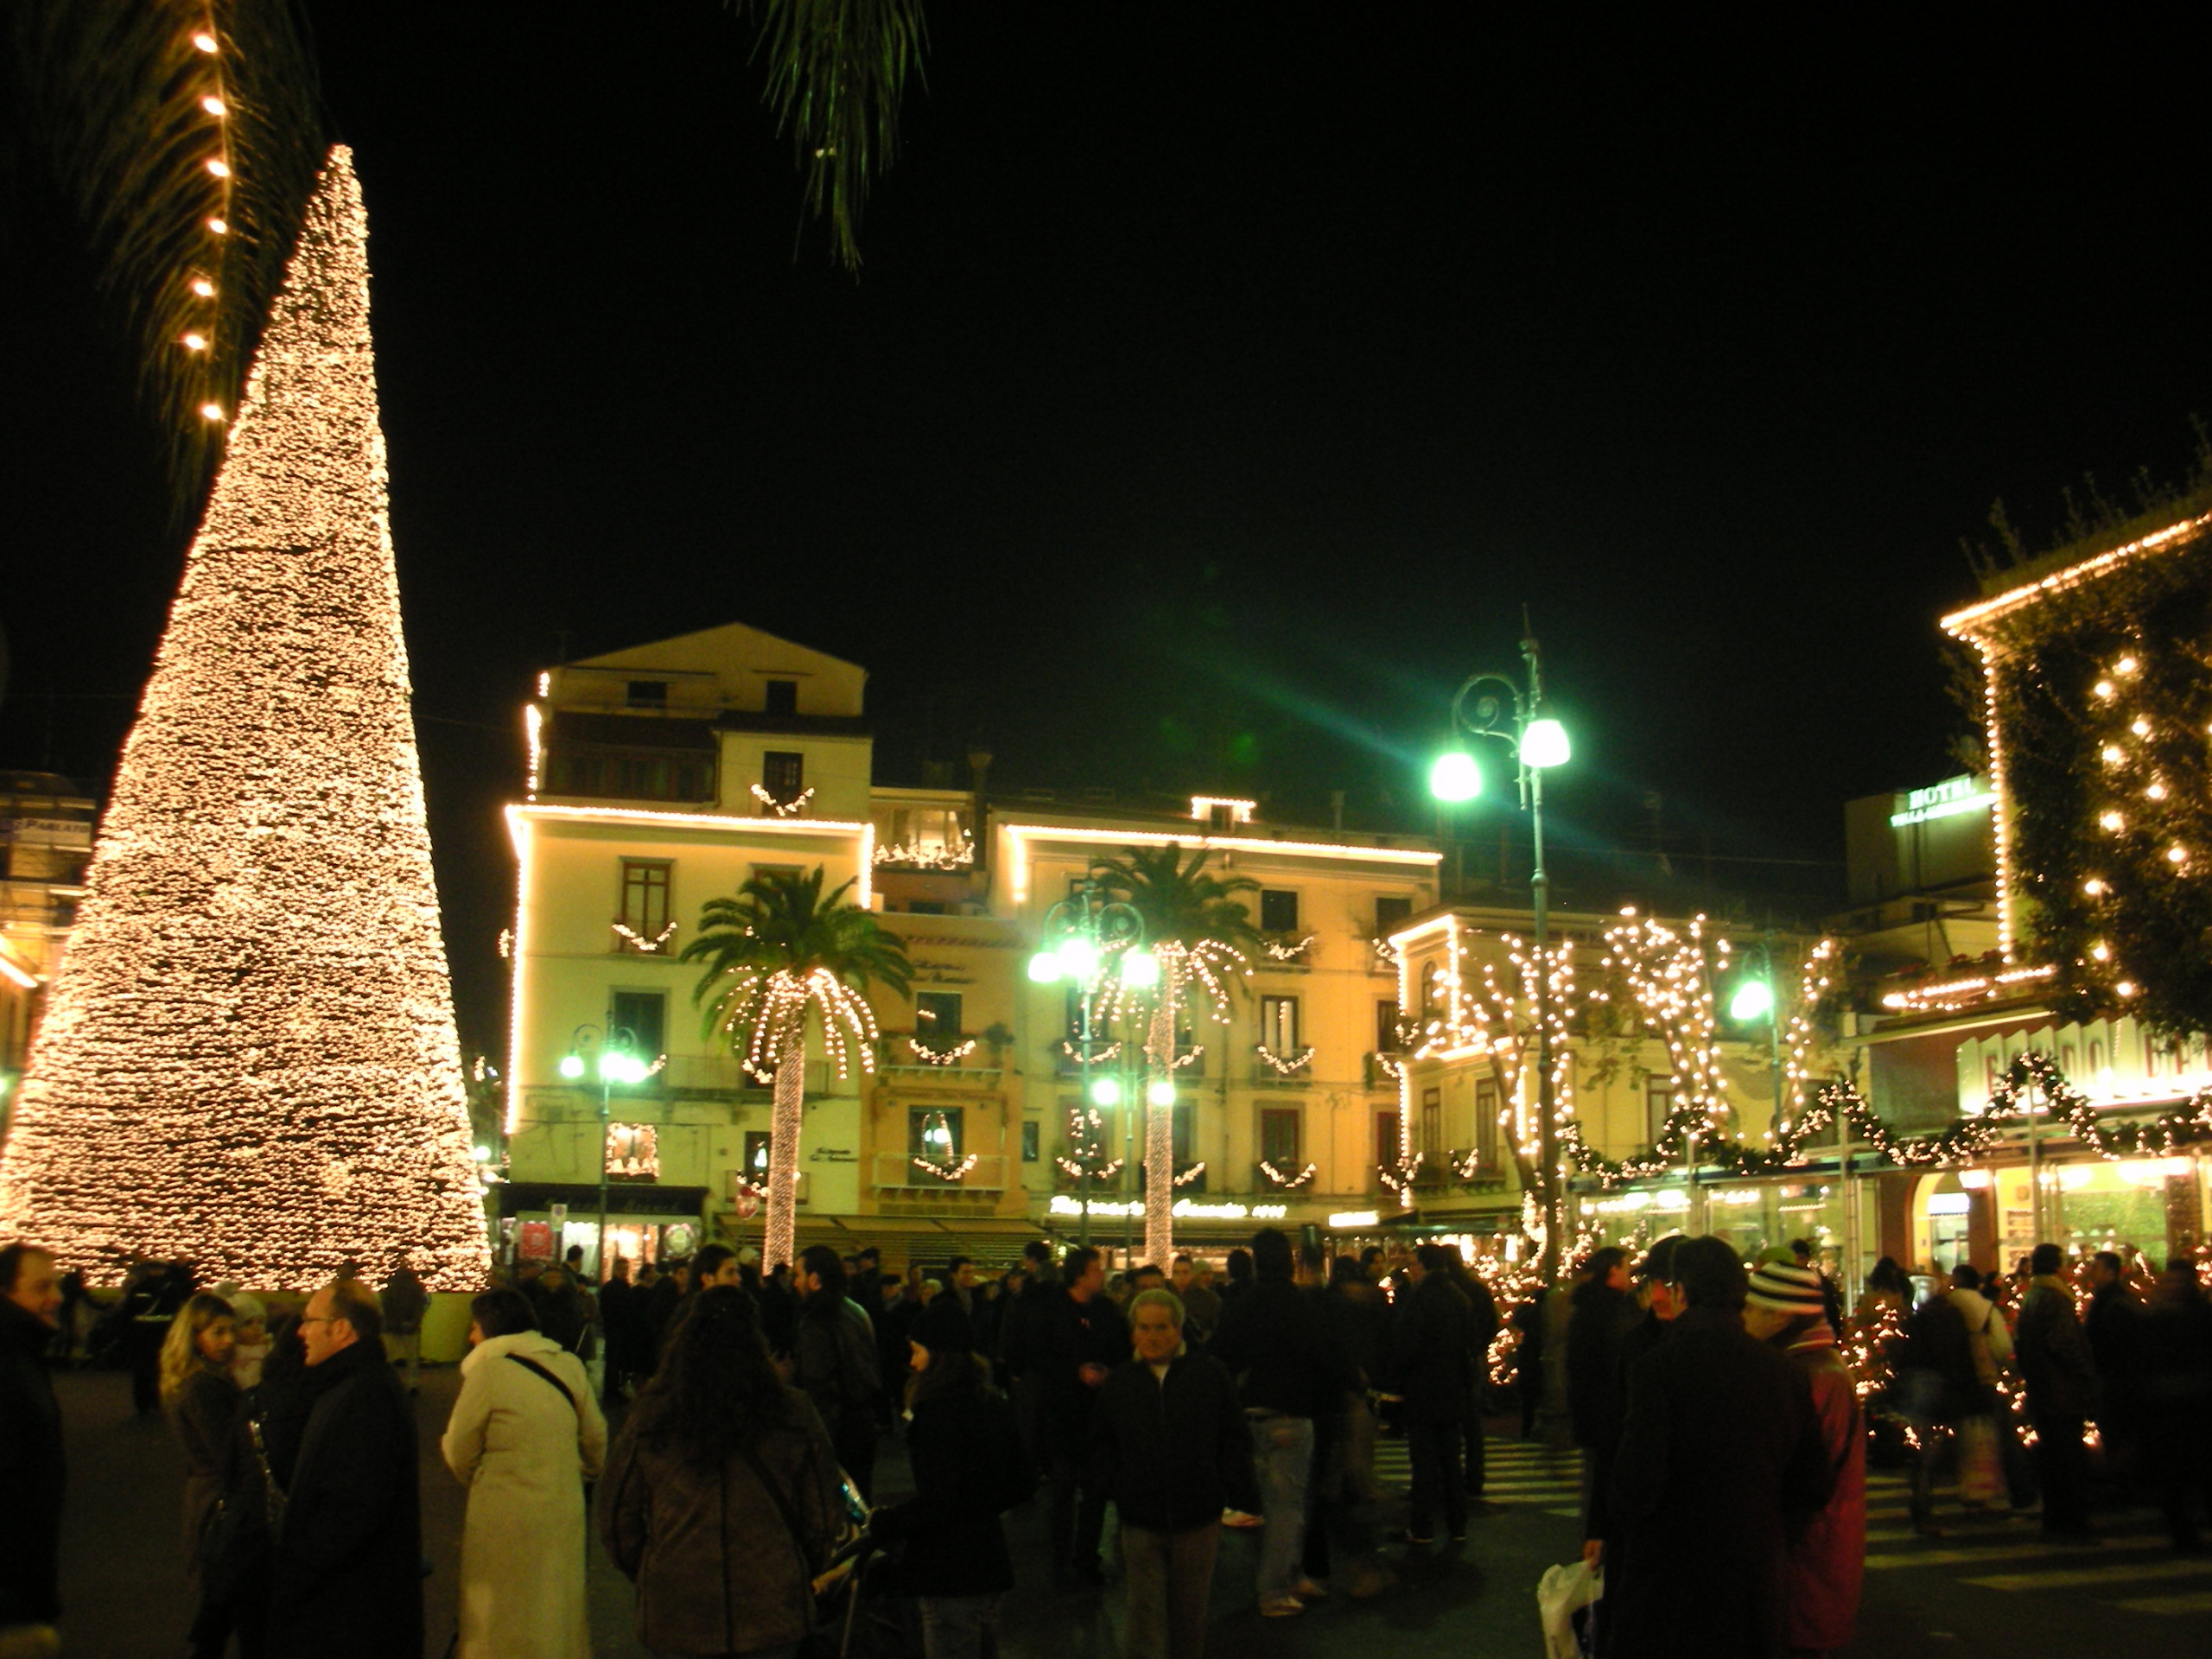 Christmas in Sorrento has a particular charm!